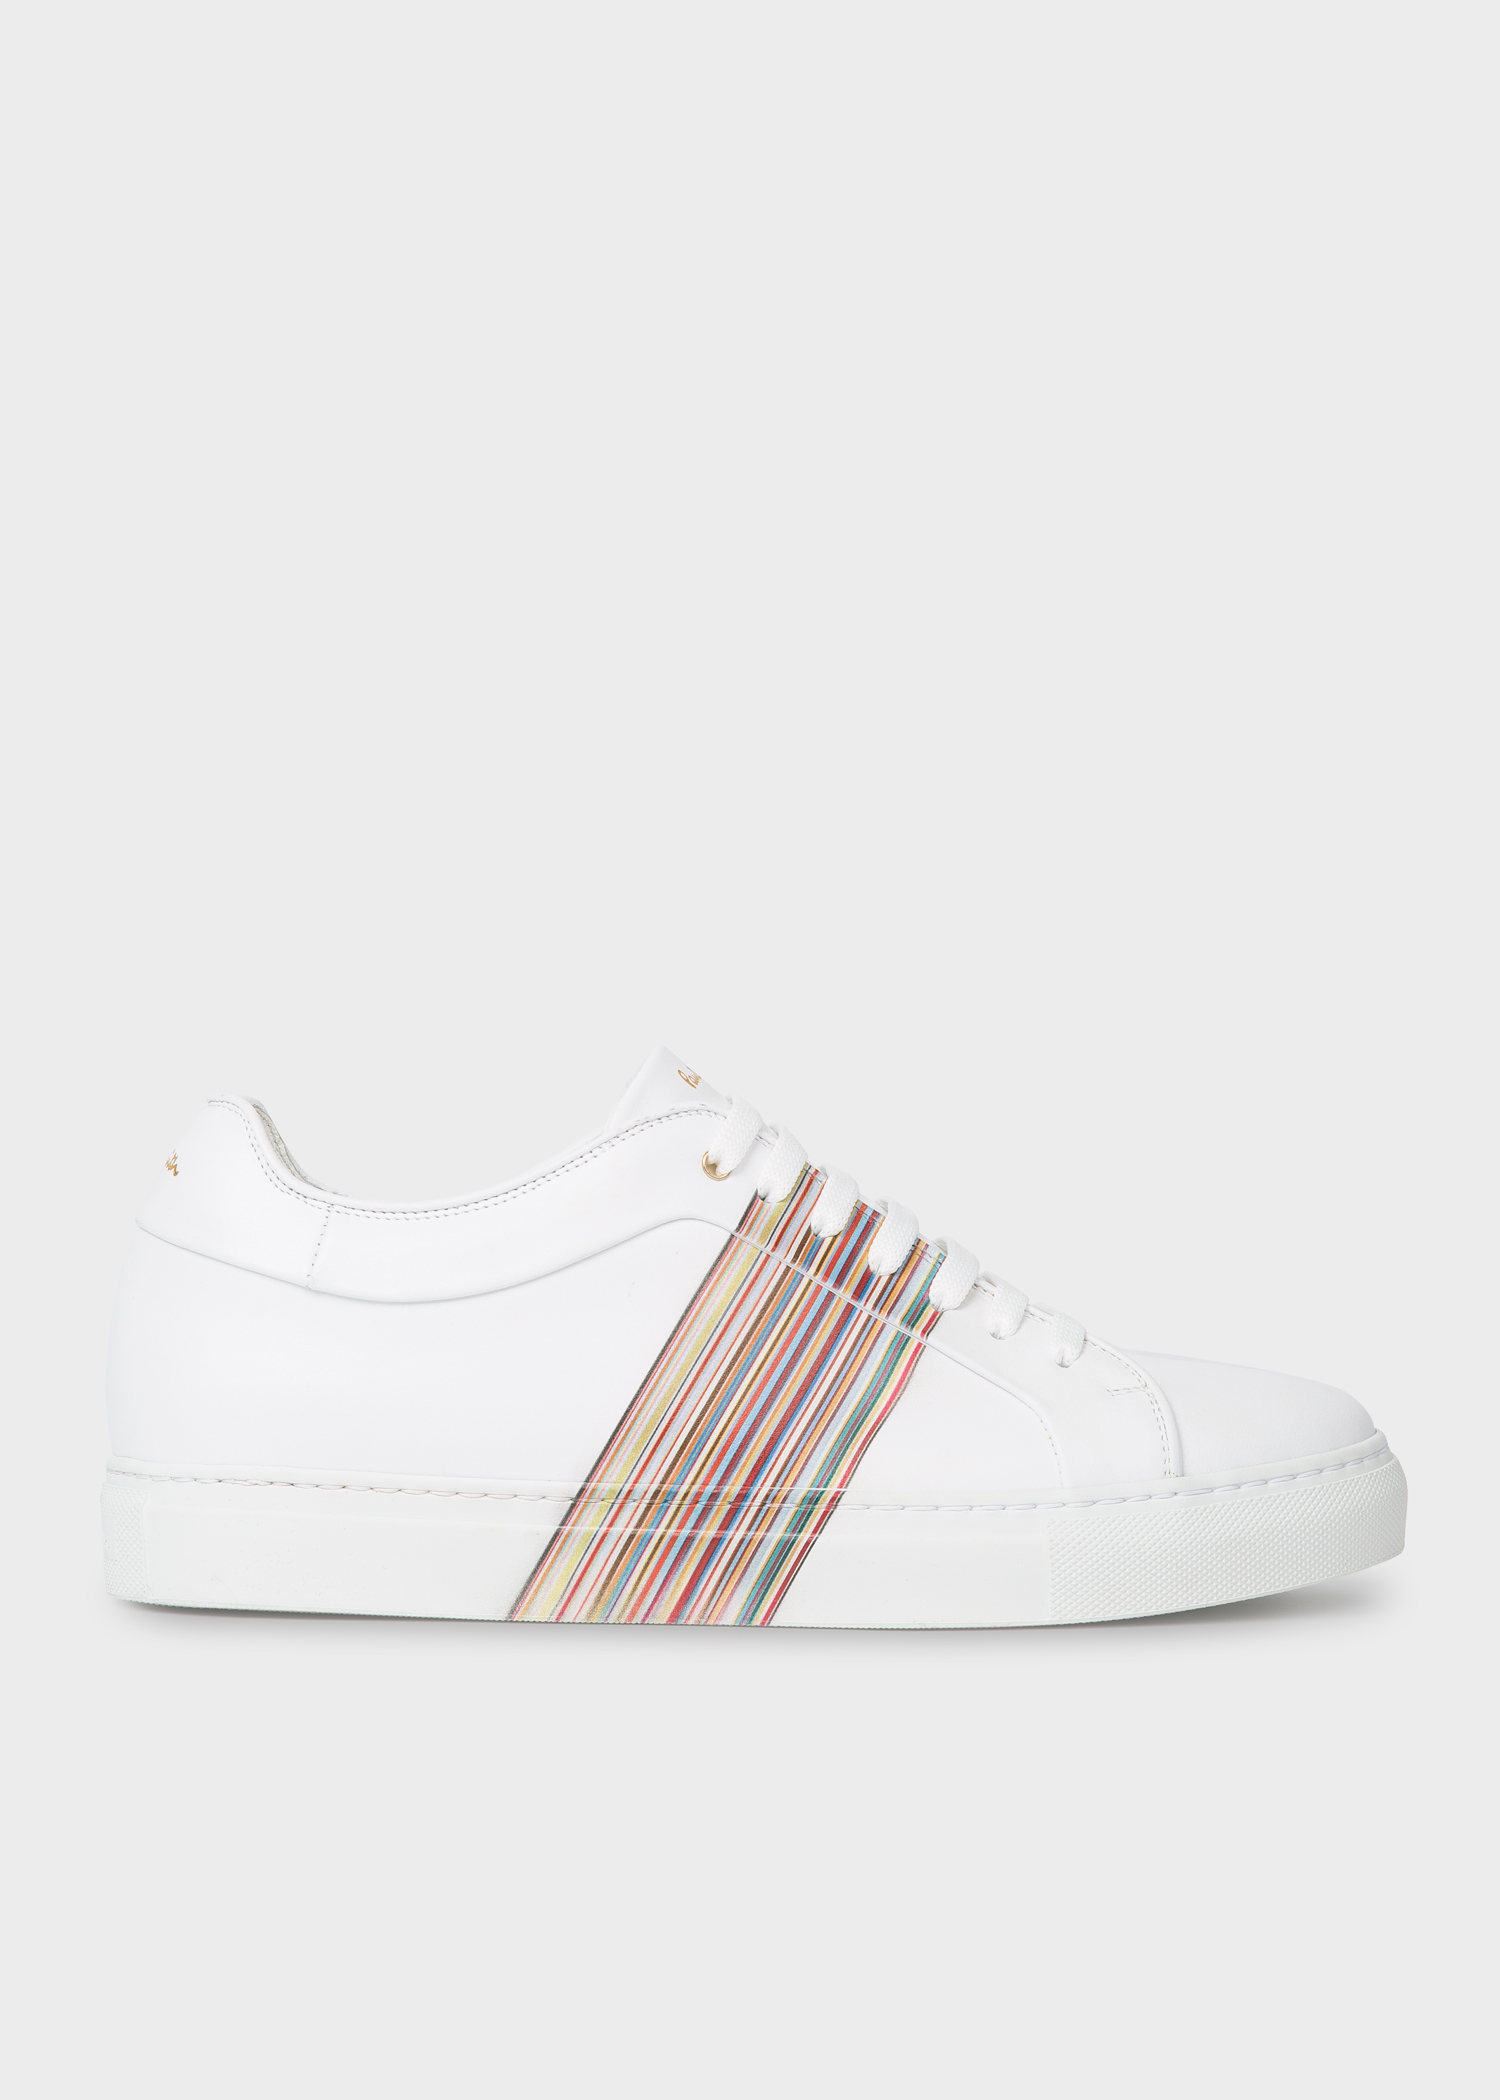 Side view - Men's White Leather 'Basso' Trainers With 'Signature Stripe' Panel Paul Smith